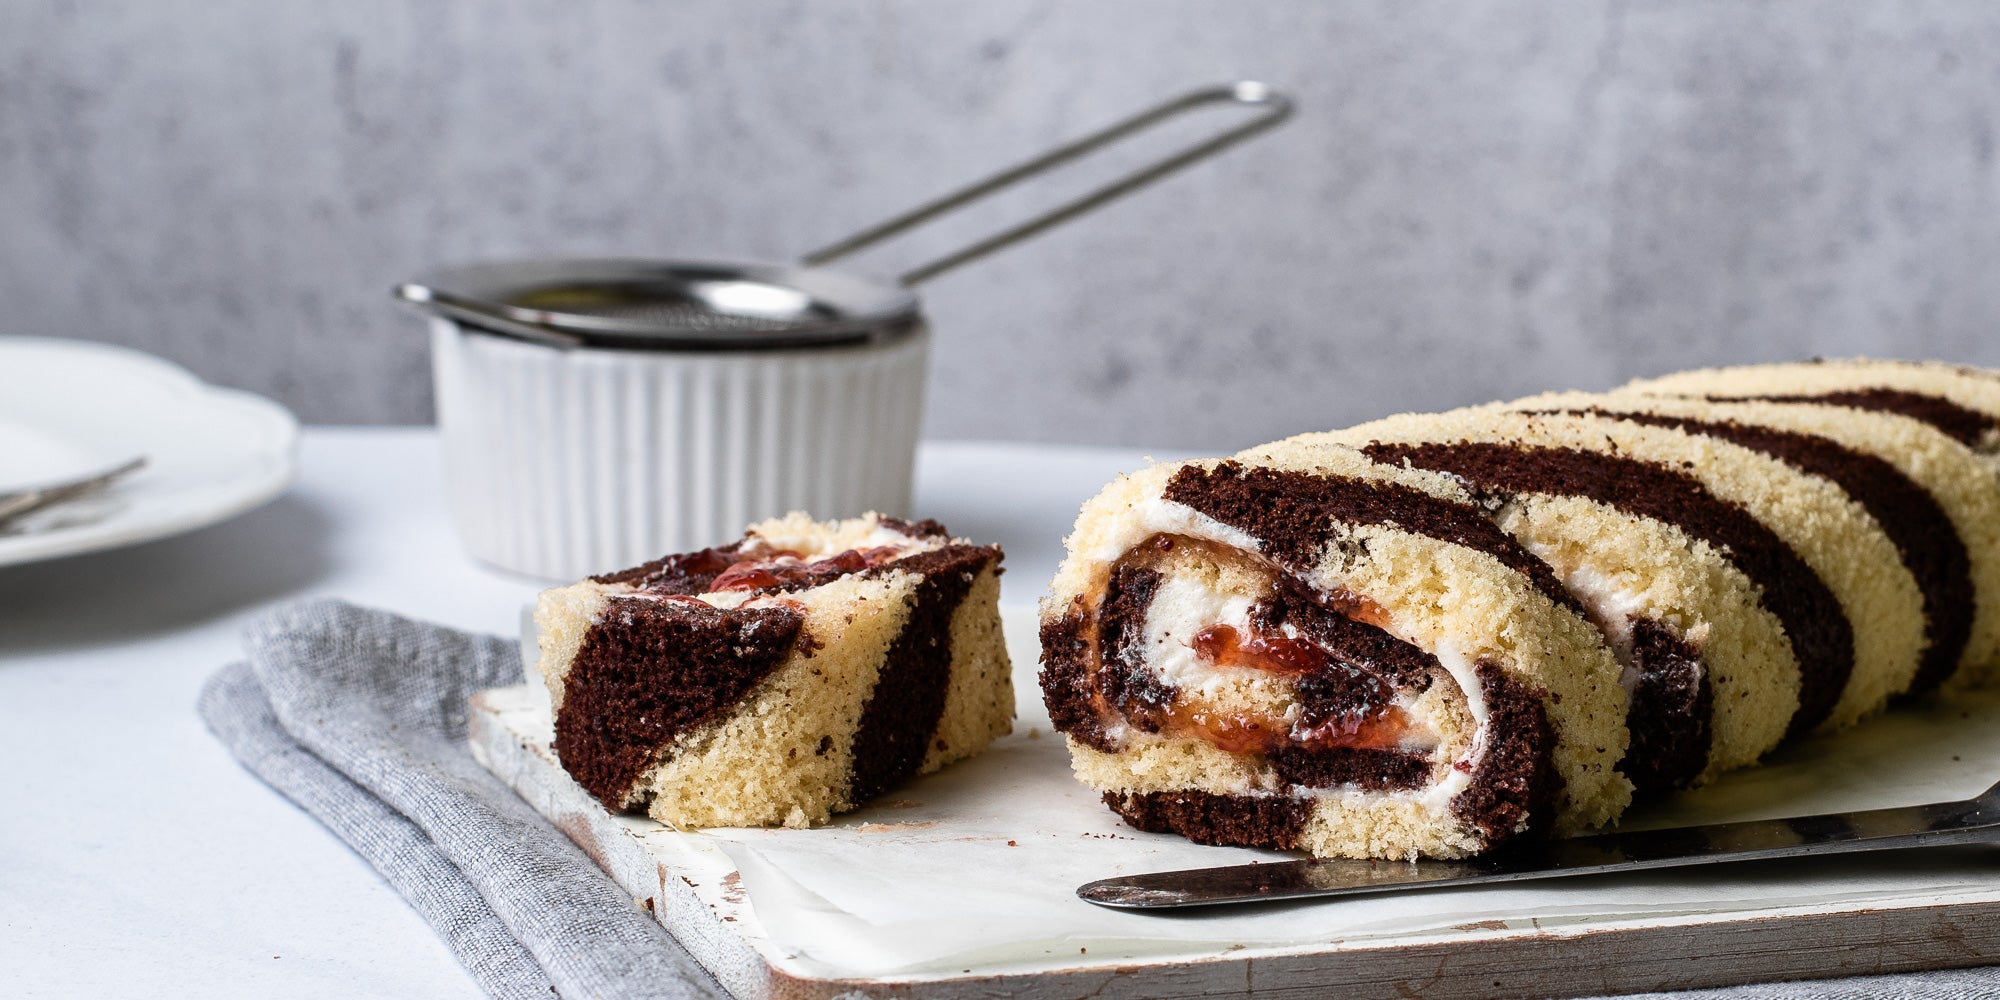 Close up of Chocolate & Vanilla Swiss Roll served on baking paper and linen, with a slice of Swiss Roll lay next to it. 